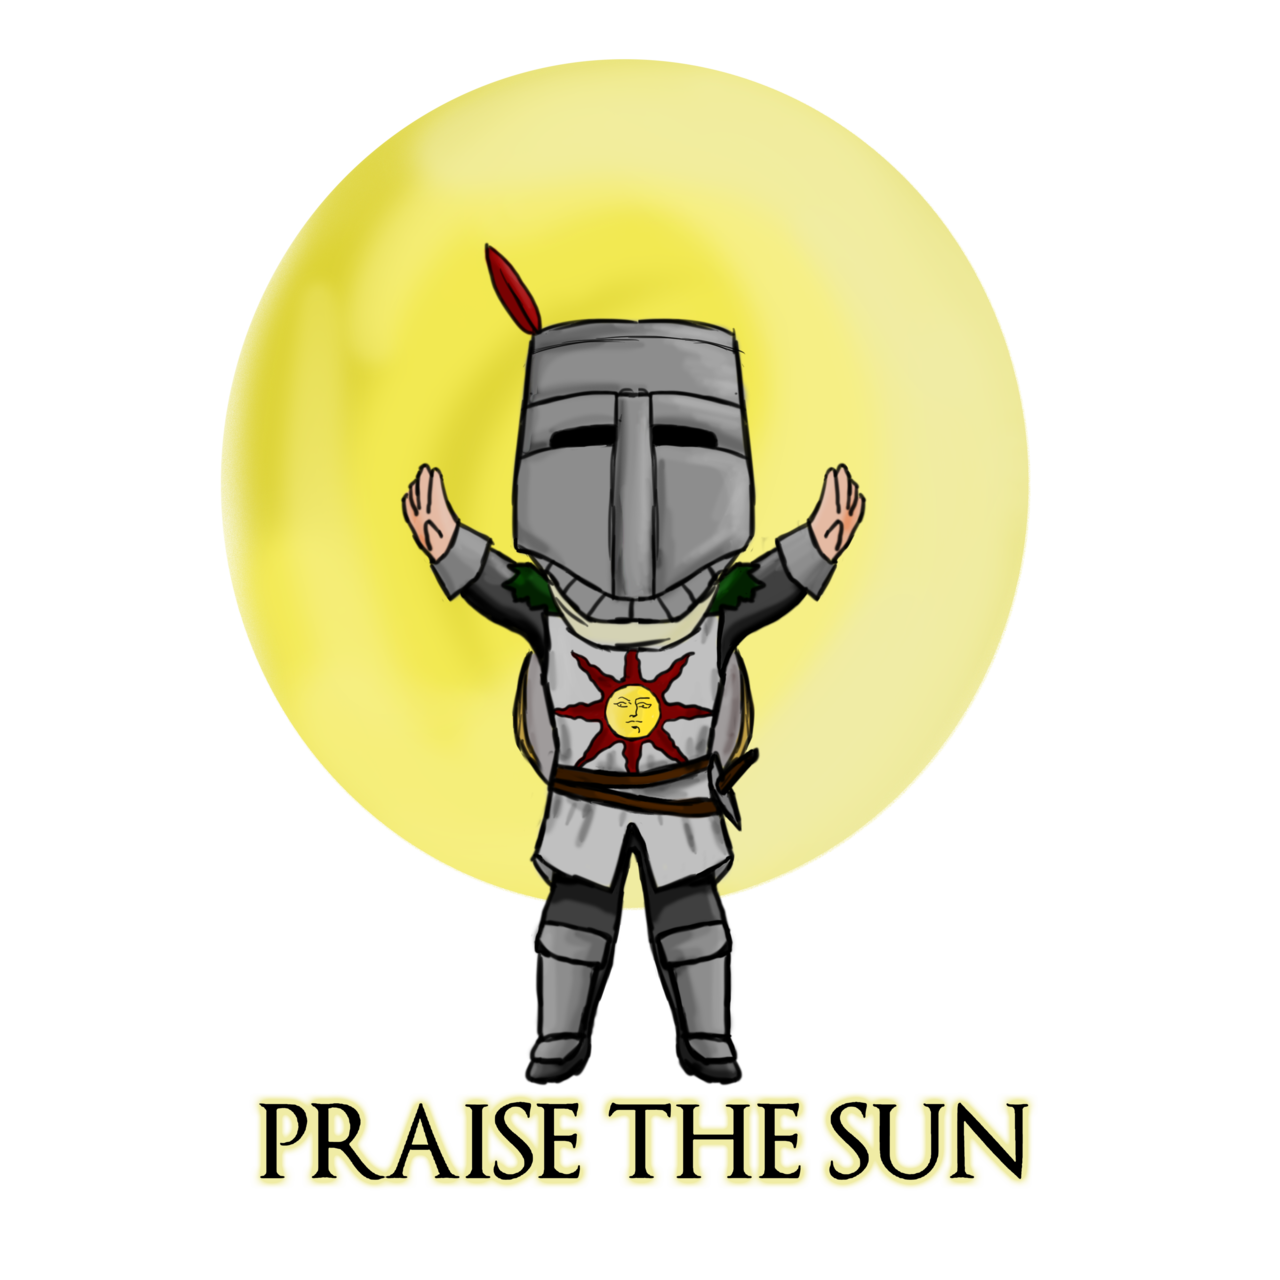 Praise the sun Solaire Chibi by james23x on